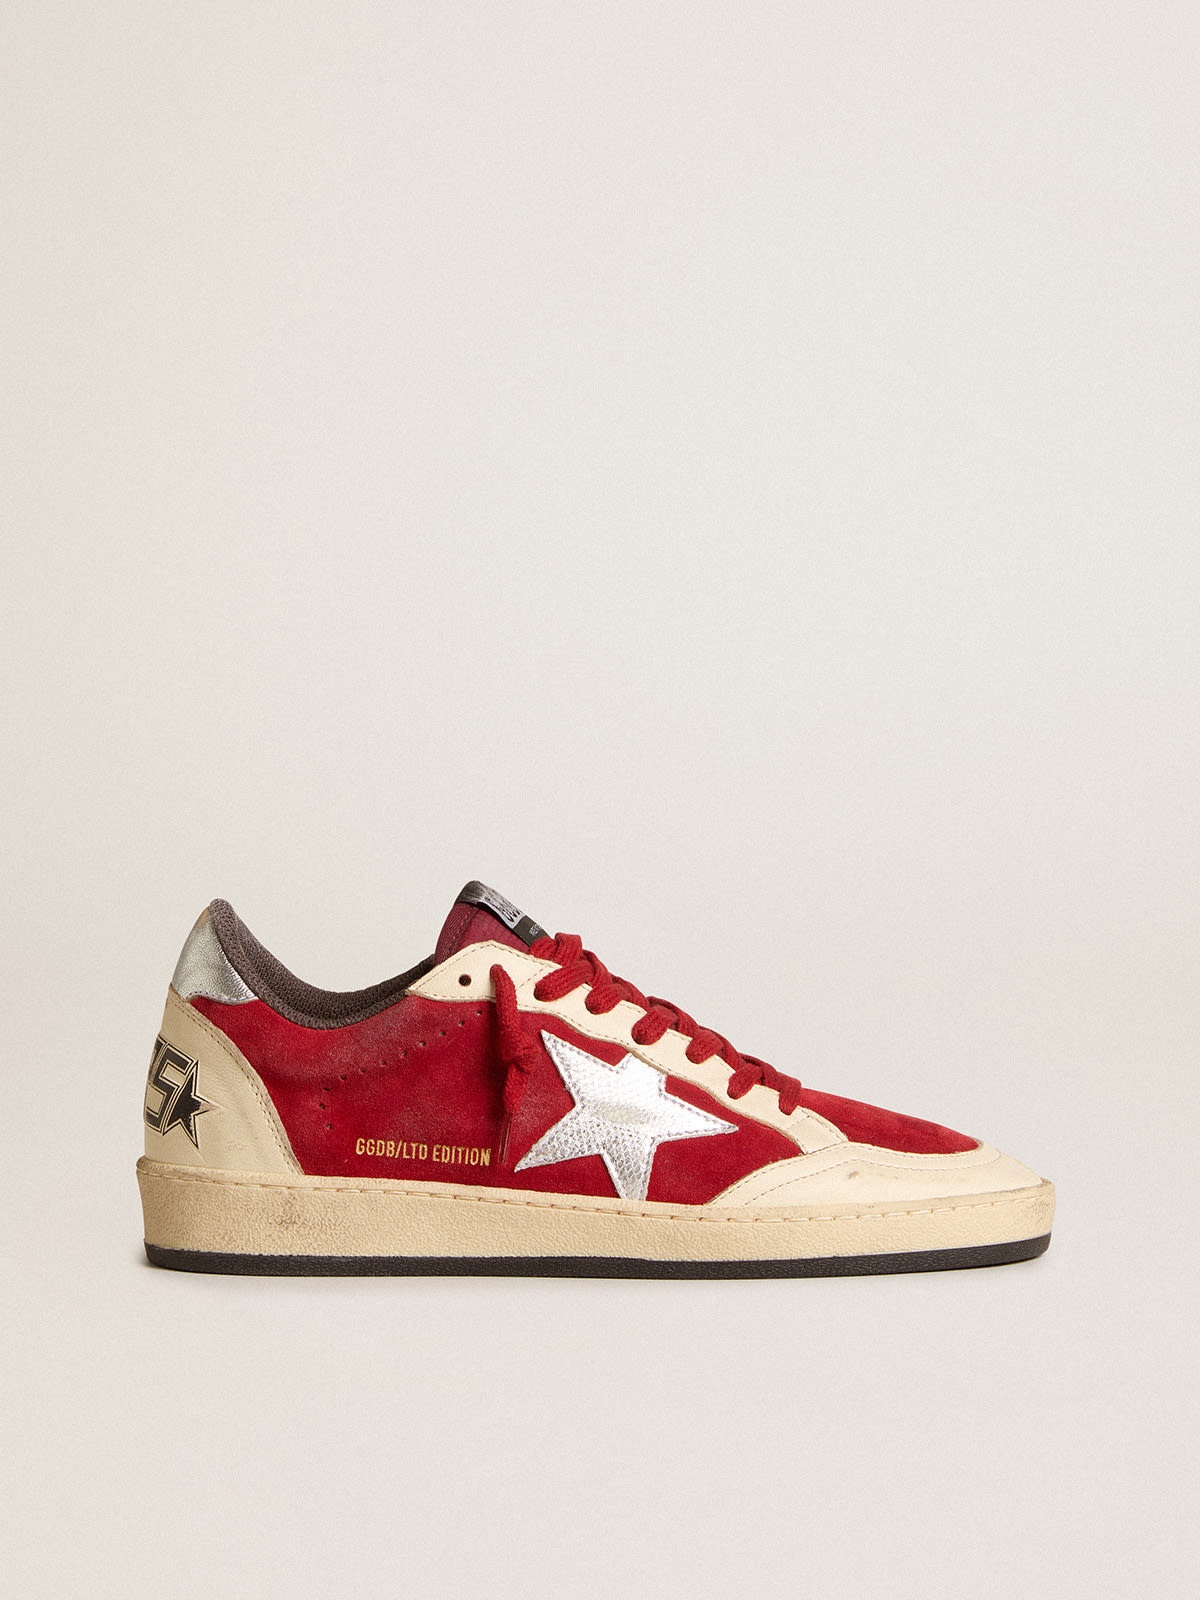 Ball Star in burgundy suede with silver leather star and heel tab - 1